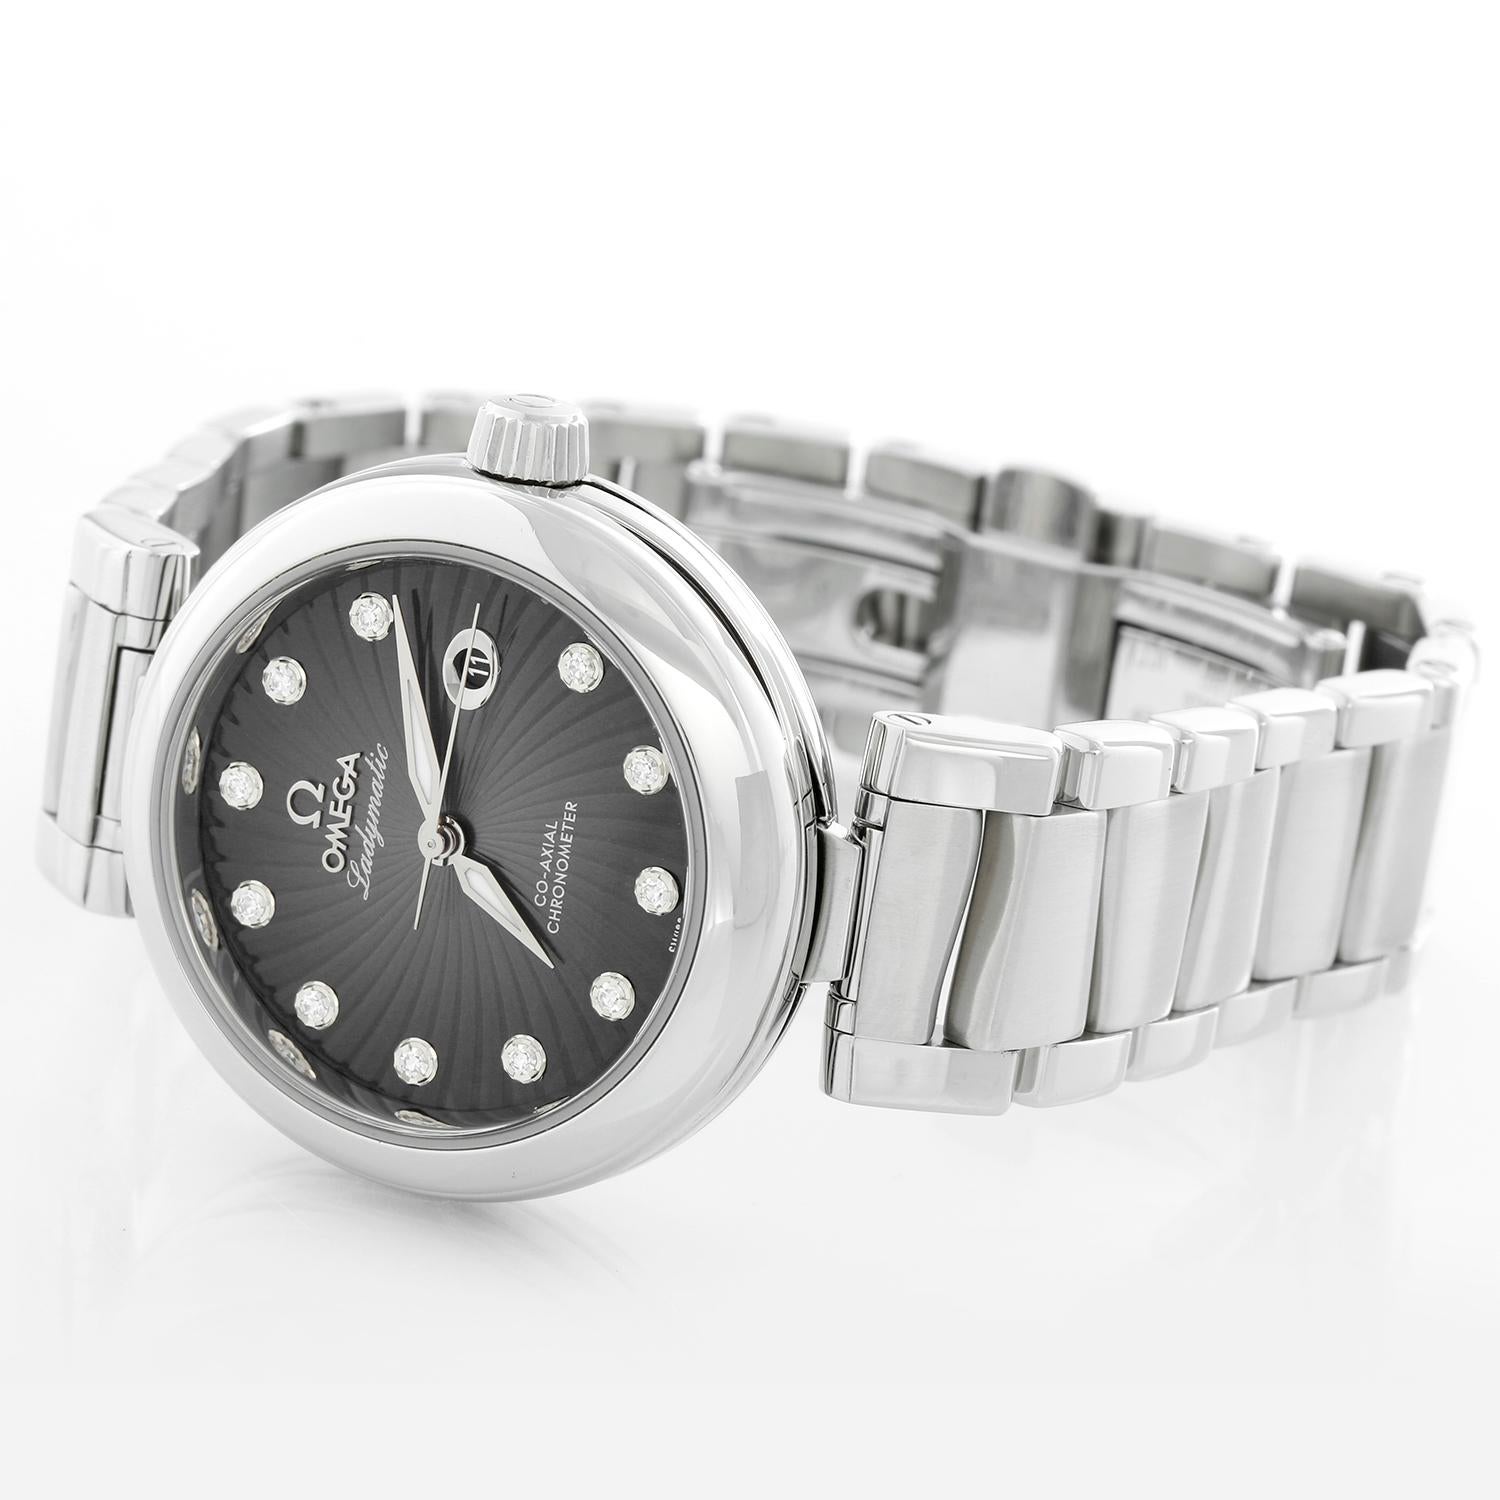 Ladies Omega  Stainless Steel DeVille Ladymatic Watch - Automatic. Stainless Steel case ( 36 mm ). Black dial with Diamond hour markers;  Date at 3 O'Clock. Stainless steel bracelet with an adjustable 6 inch wrist bracelet. Pre-owned with custom box.